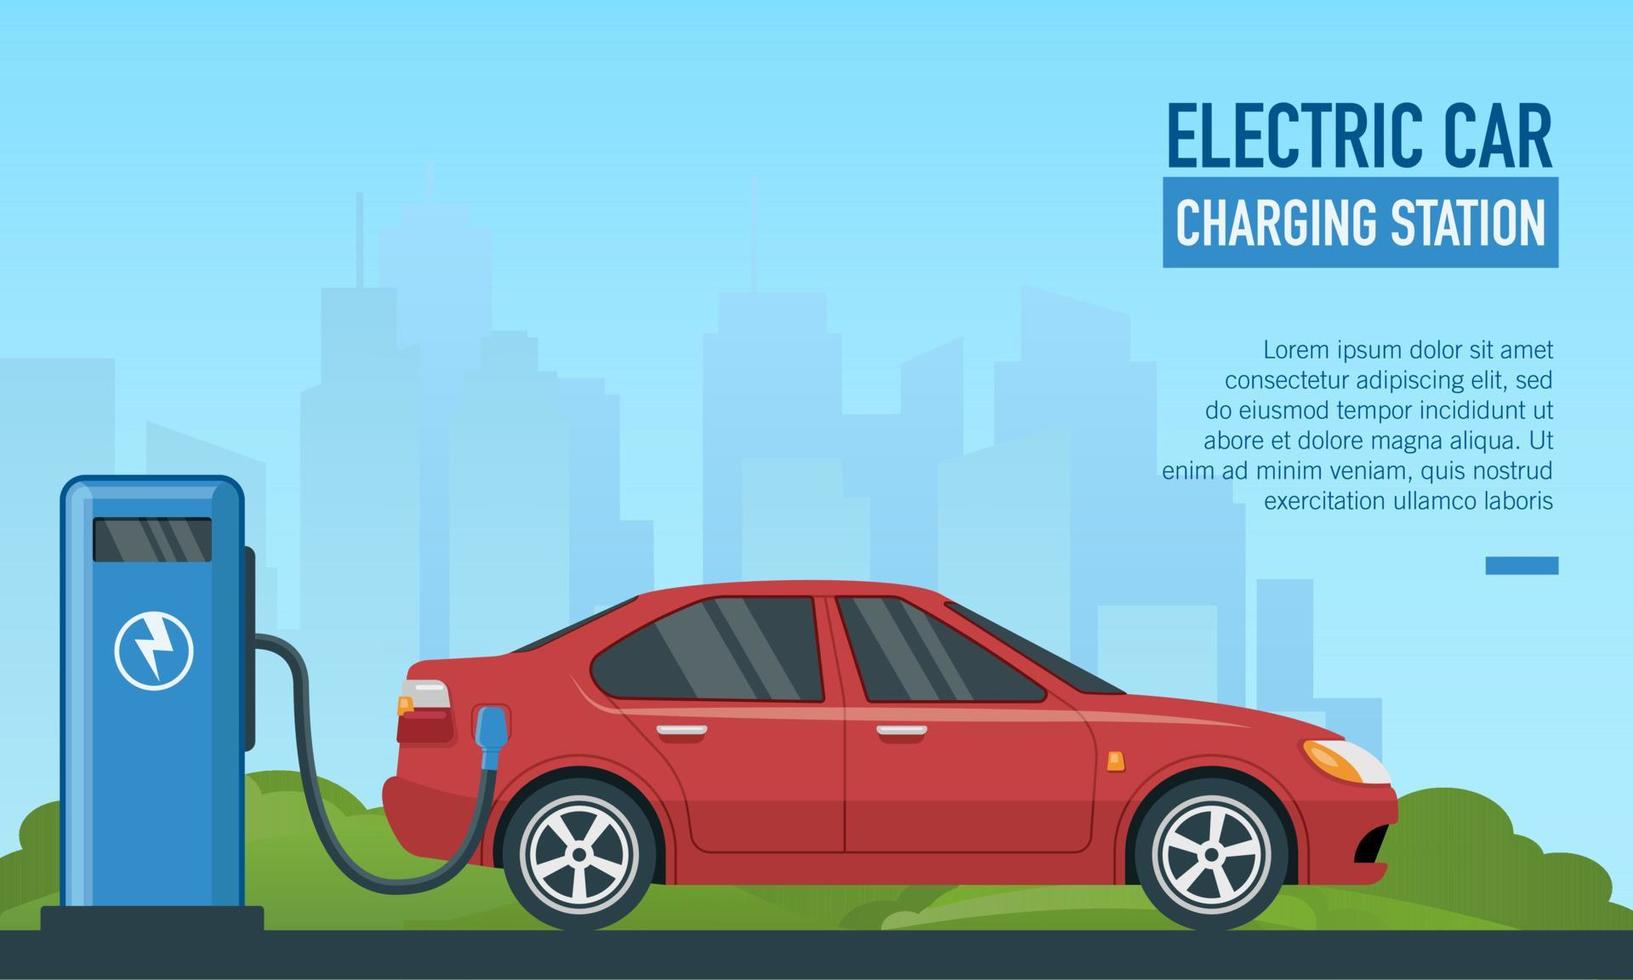 Flat vector illustration of electric car charging station. Suitable for background design of eco friendly vehicle, electric car company, and renewable energy poster.